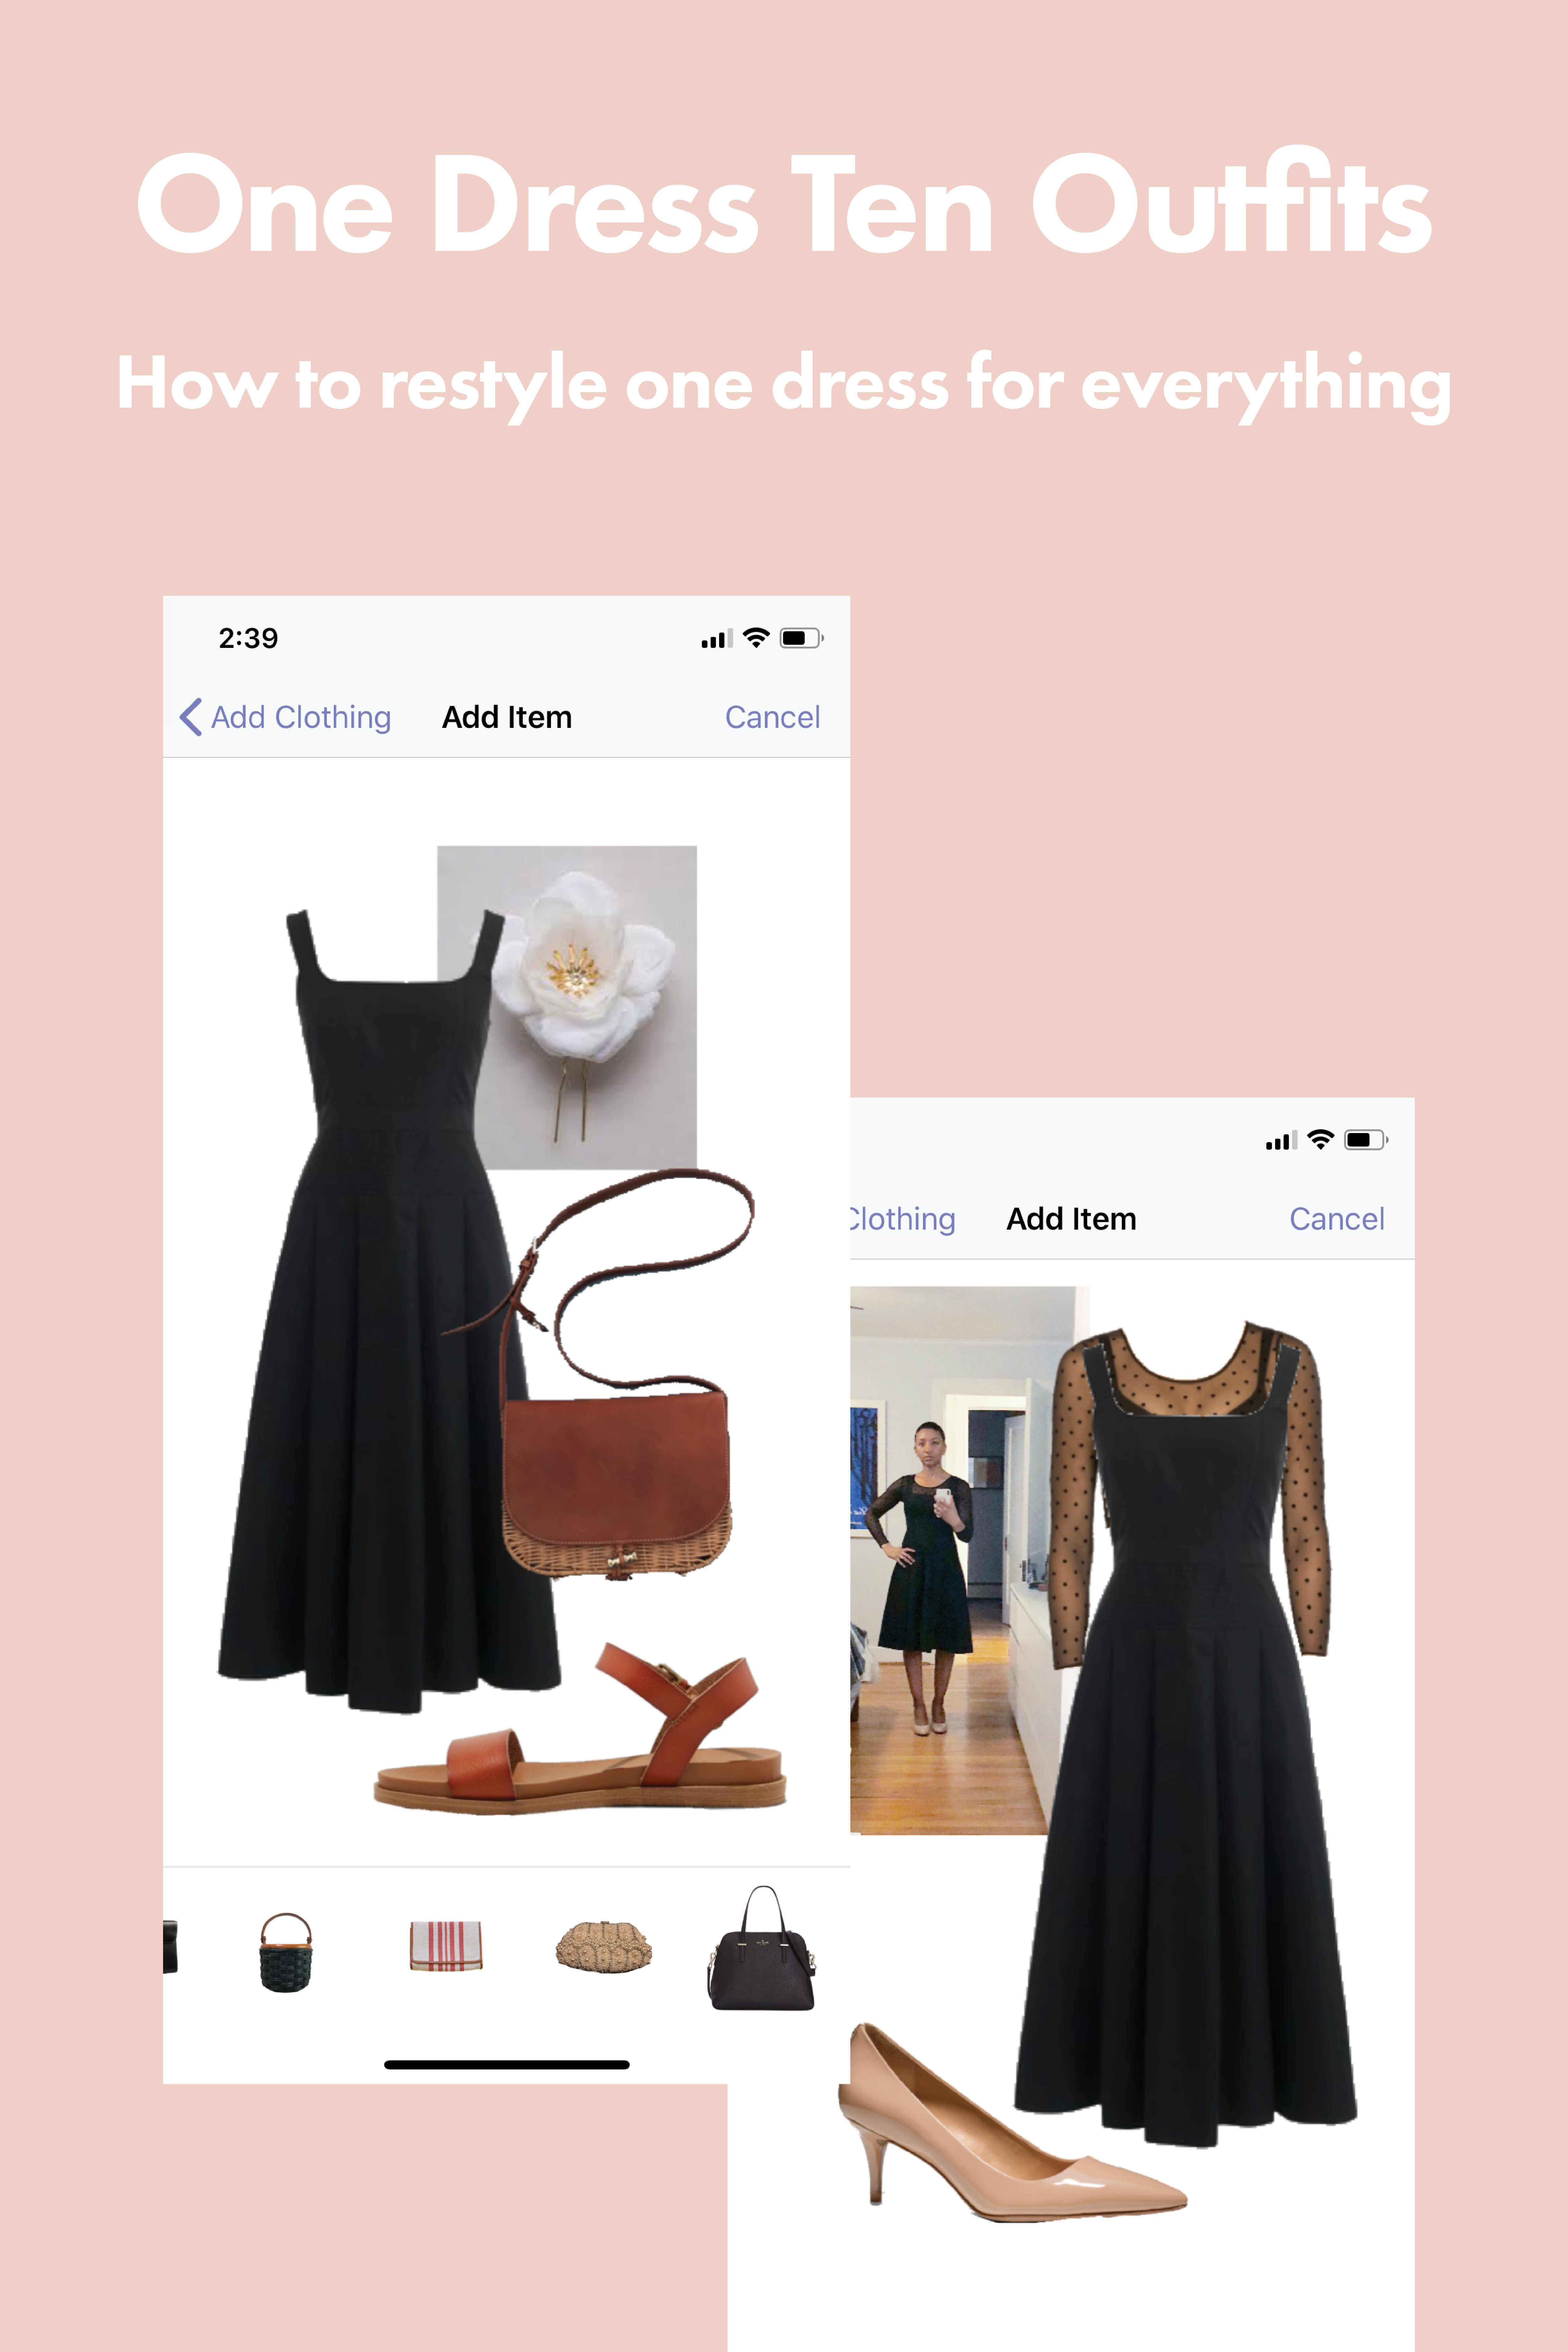 Stylebook Closet App: Make 10 Outfits from One Dress